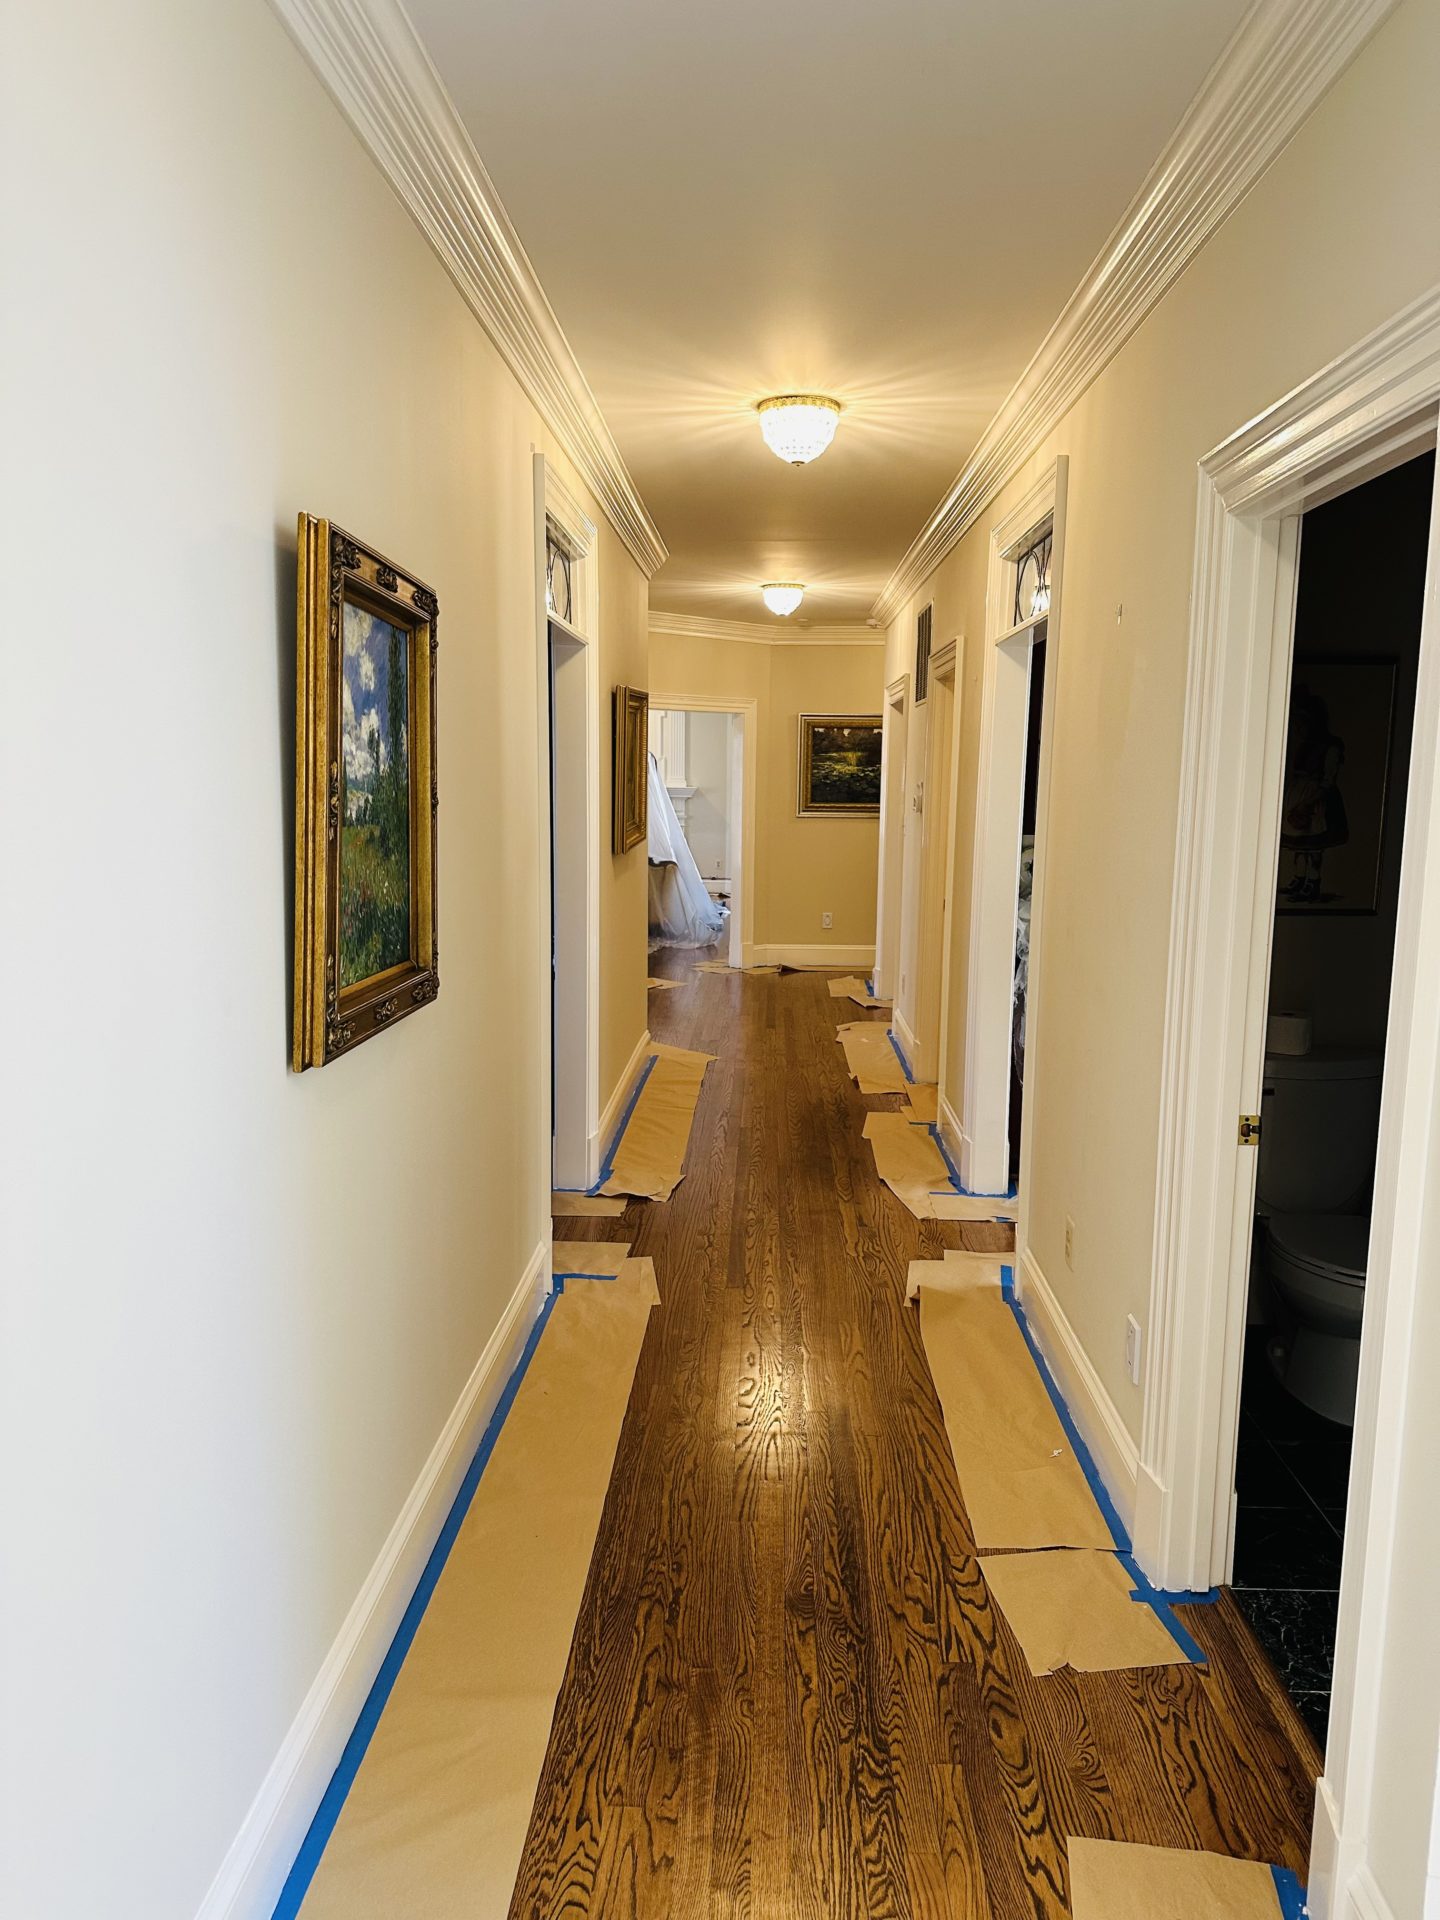 Our prep work ensures a flawless paint application on the trim thorough meticulous prep work